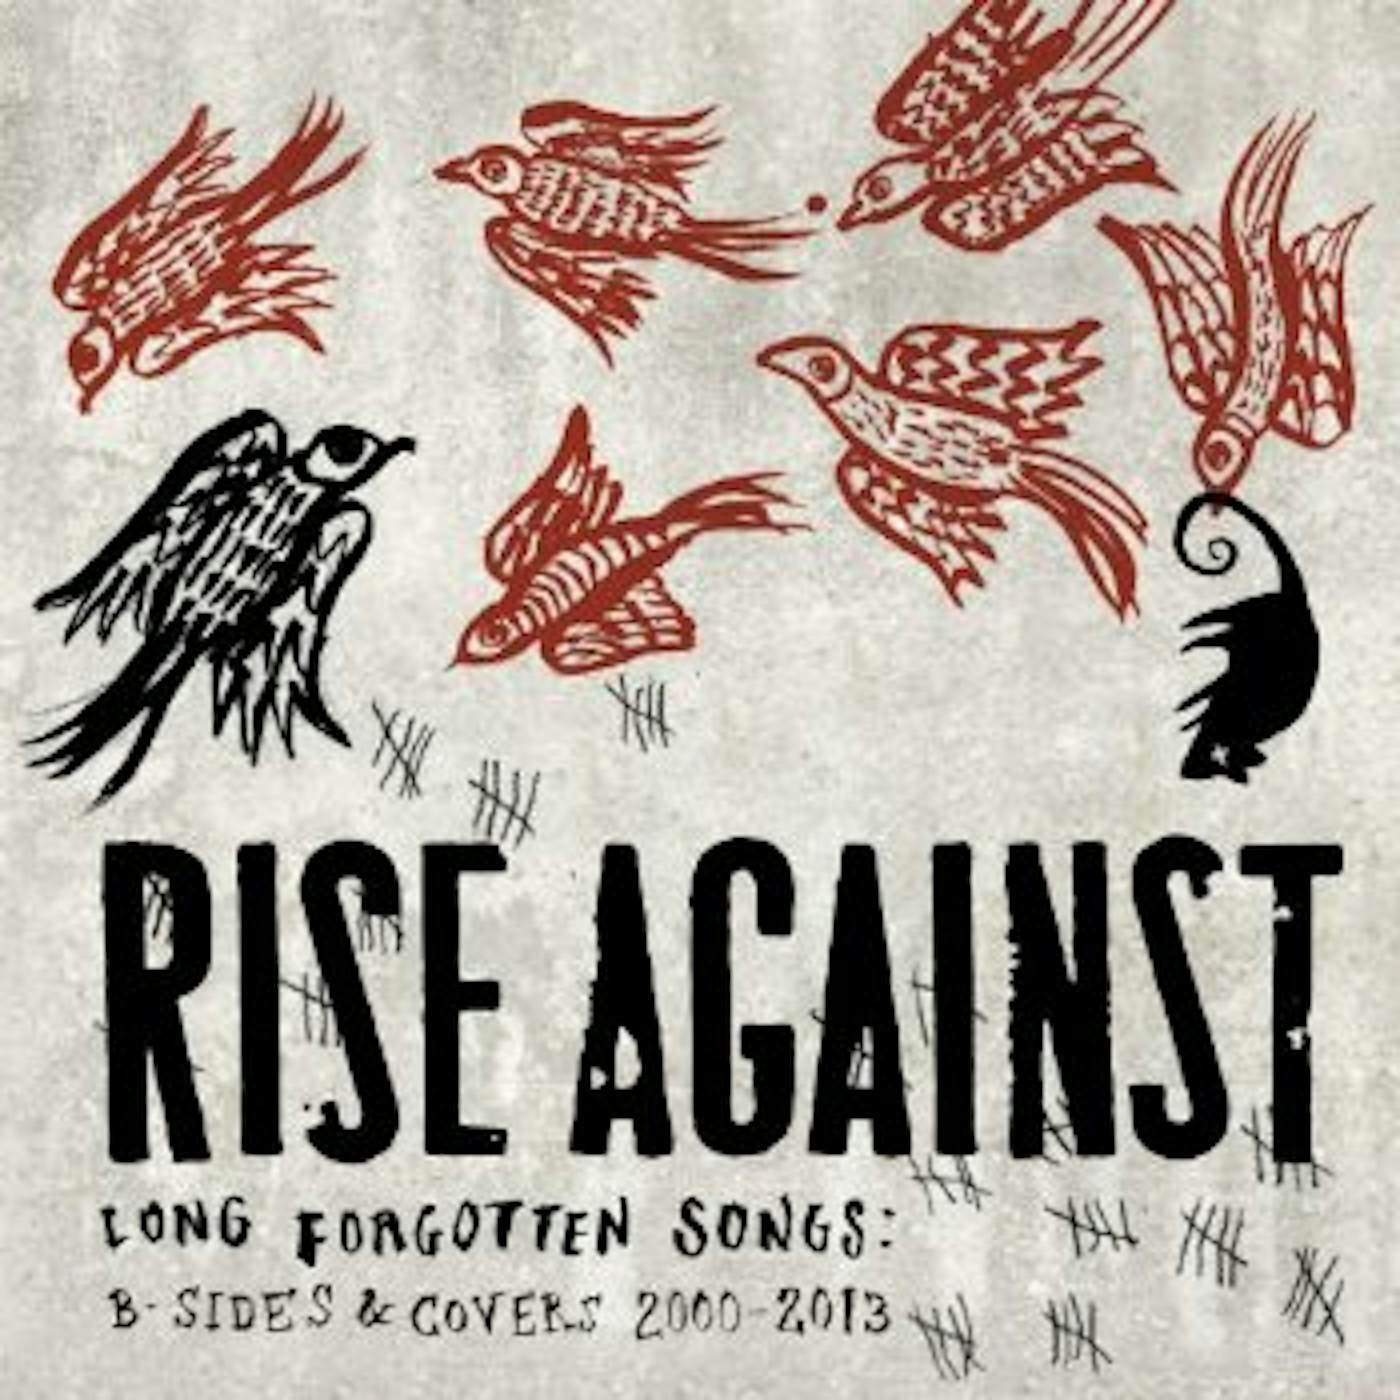 Rise Against Long Forgotten Songs: B-Sides & Covers 2000-2013 Vinyl Record